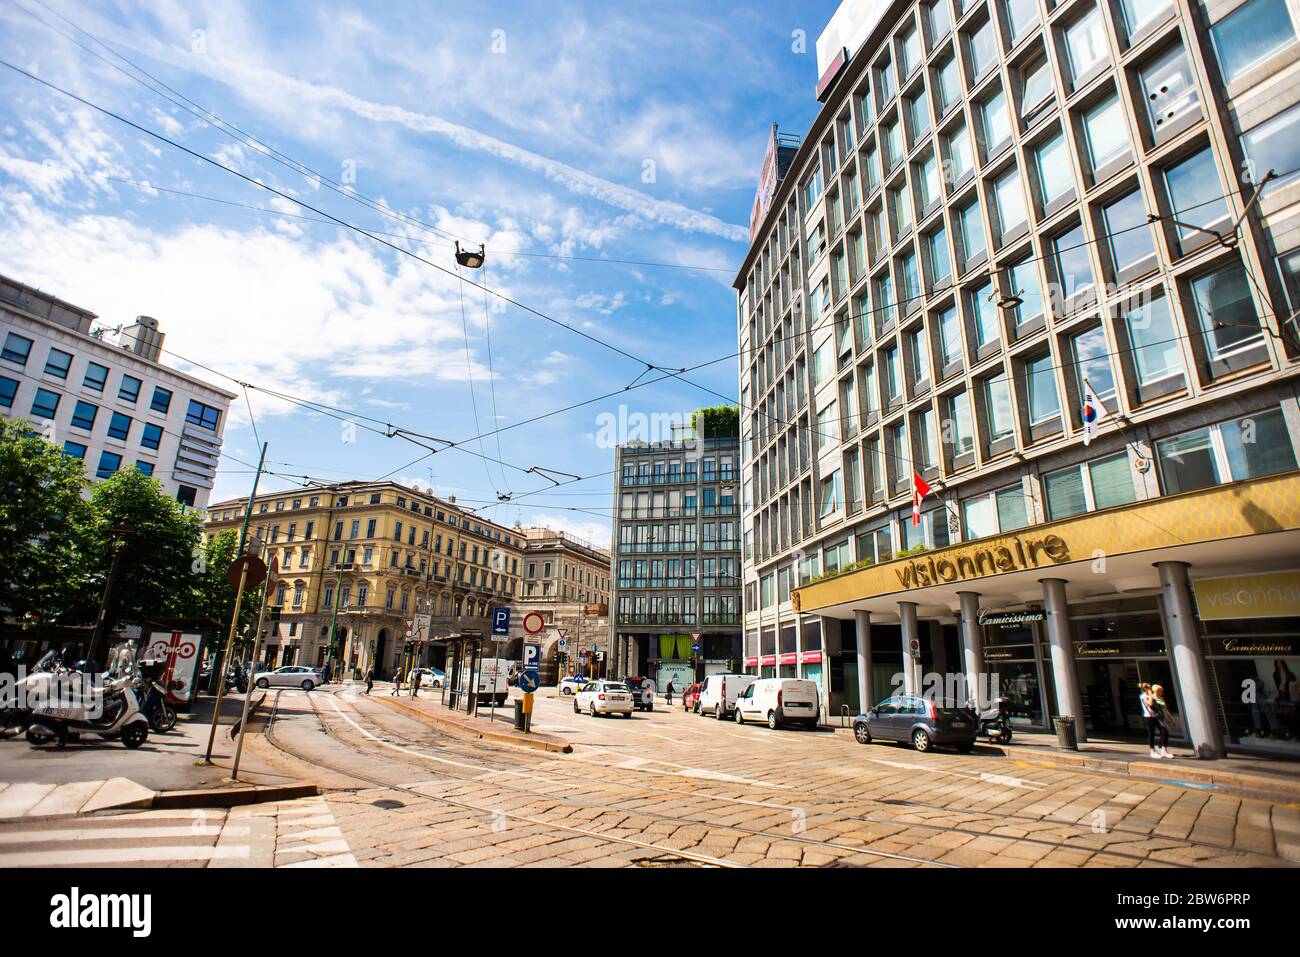 Milan. Italy - May 21, 2019: Square Piazza Cavour in Milan. The Business Center of Milan. Restaurant, Offices and State Institutions. Tram Station. Stock Photo